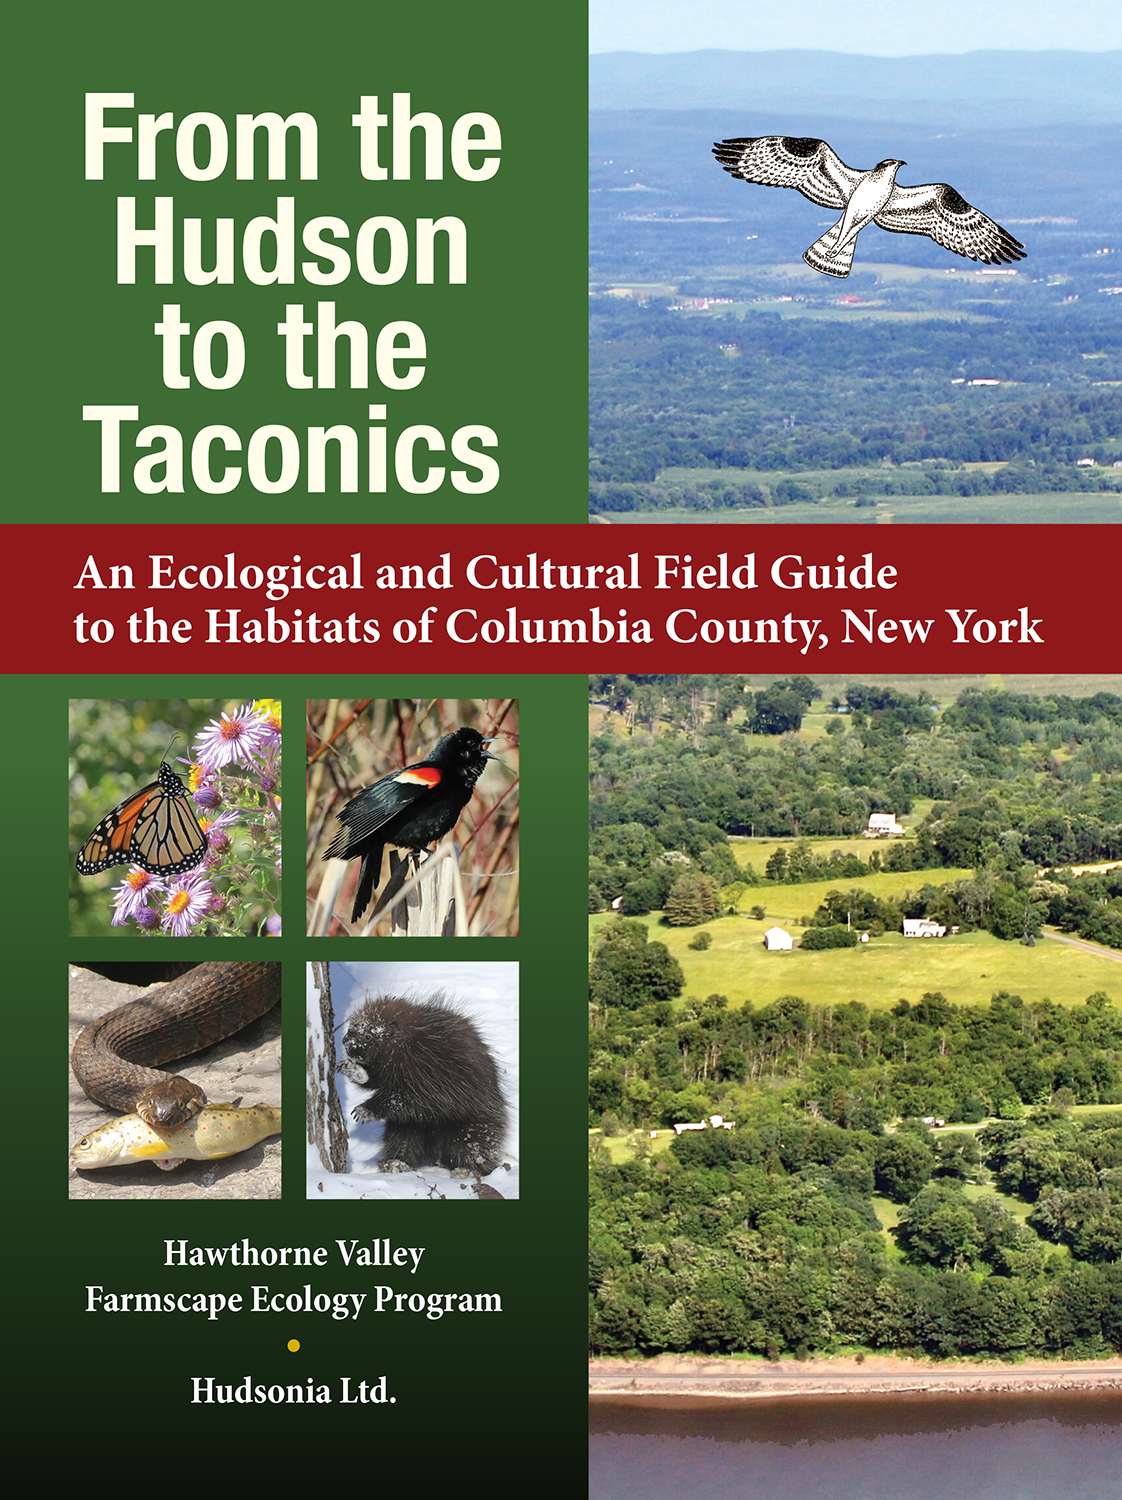 From the Hudson to the Taconics: Field Guide to Columbia County